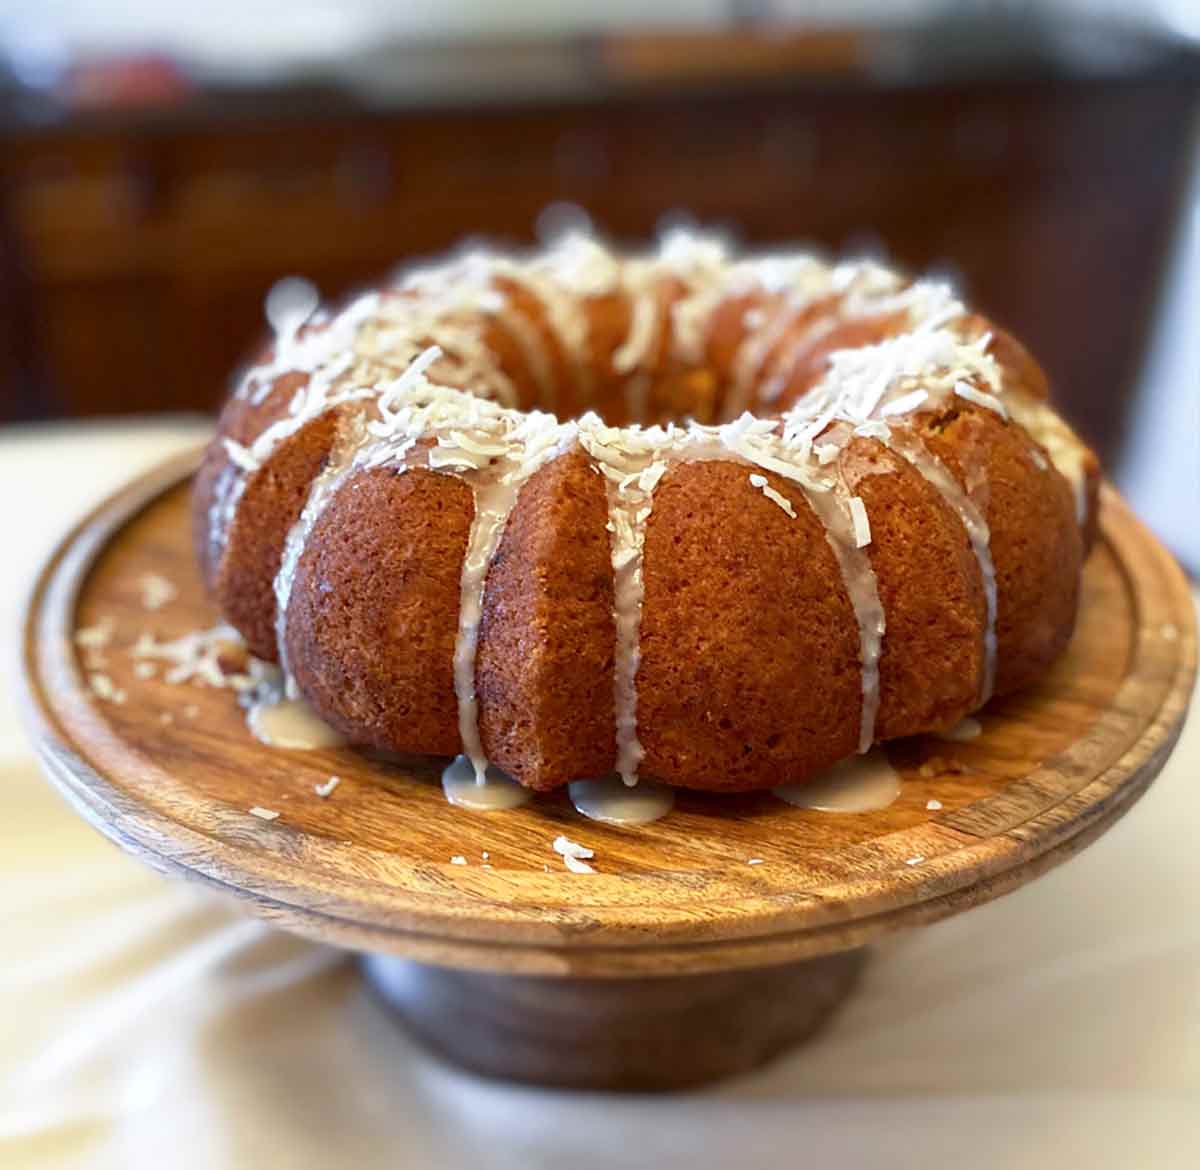 A banana coconut rum bundt cake on a wooden cake stand.